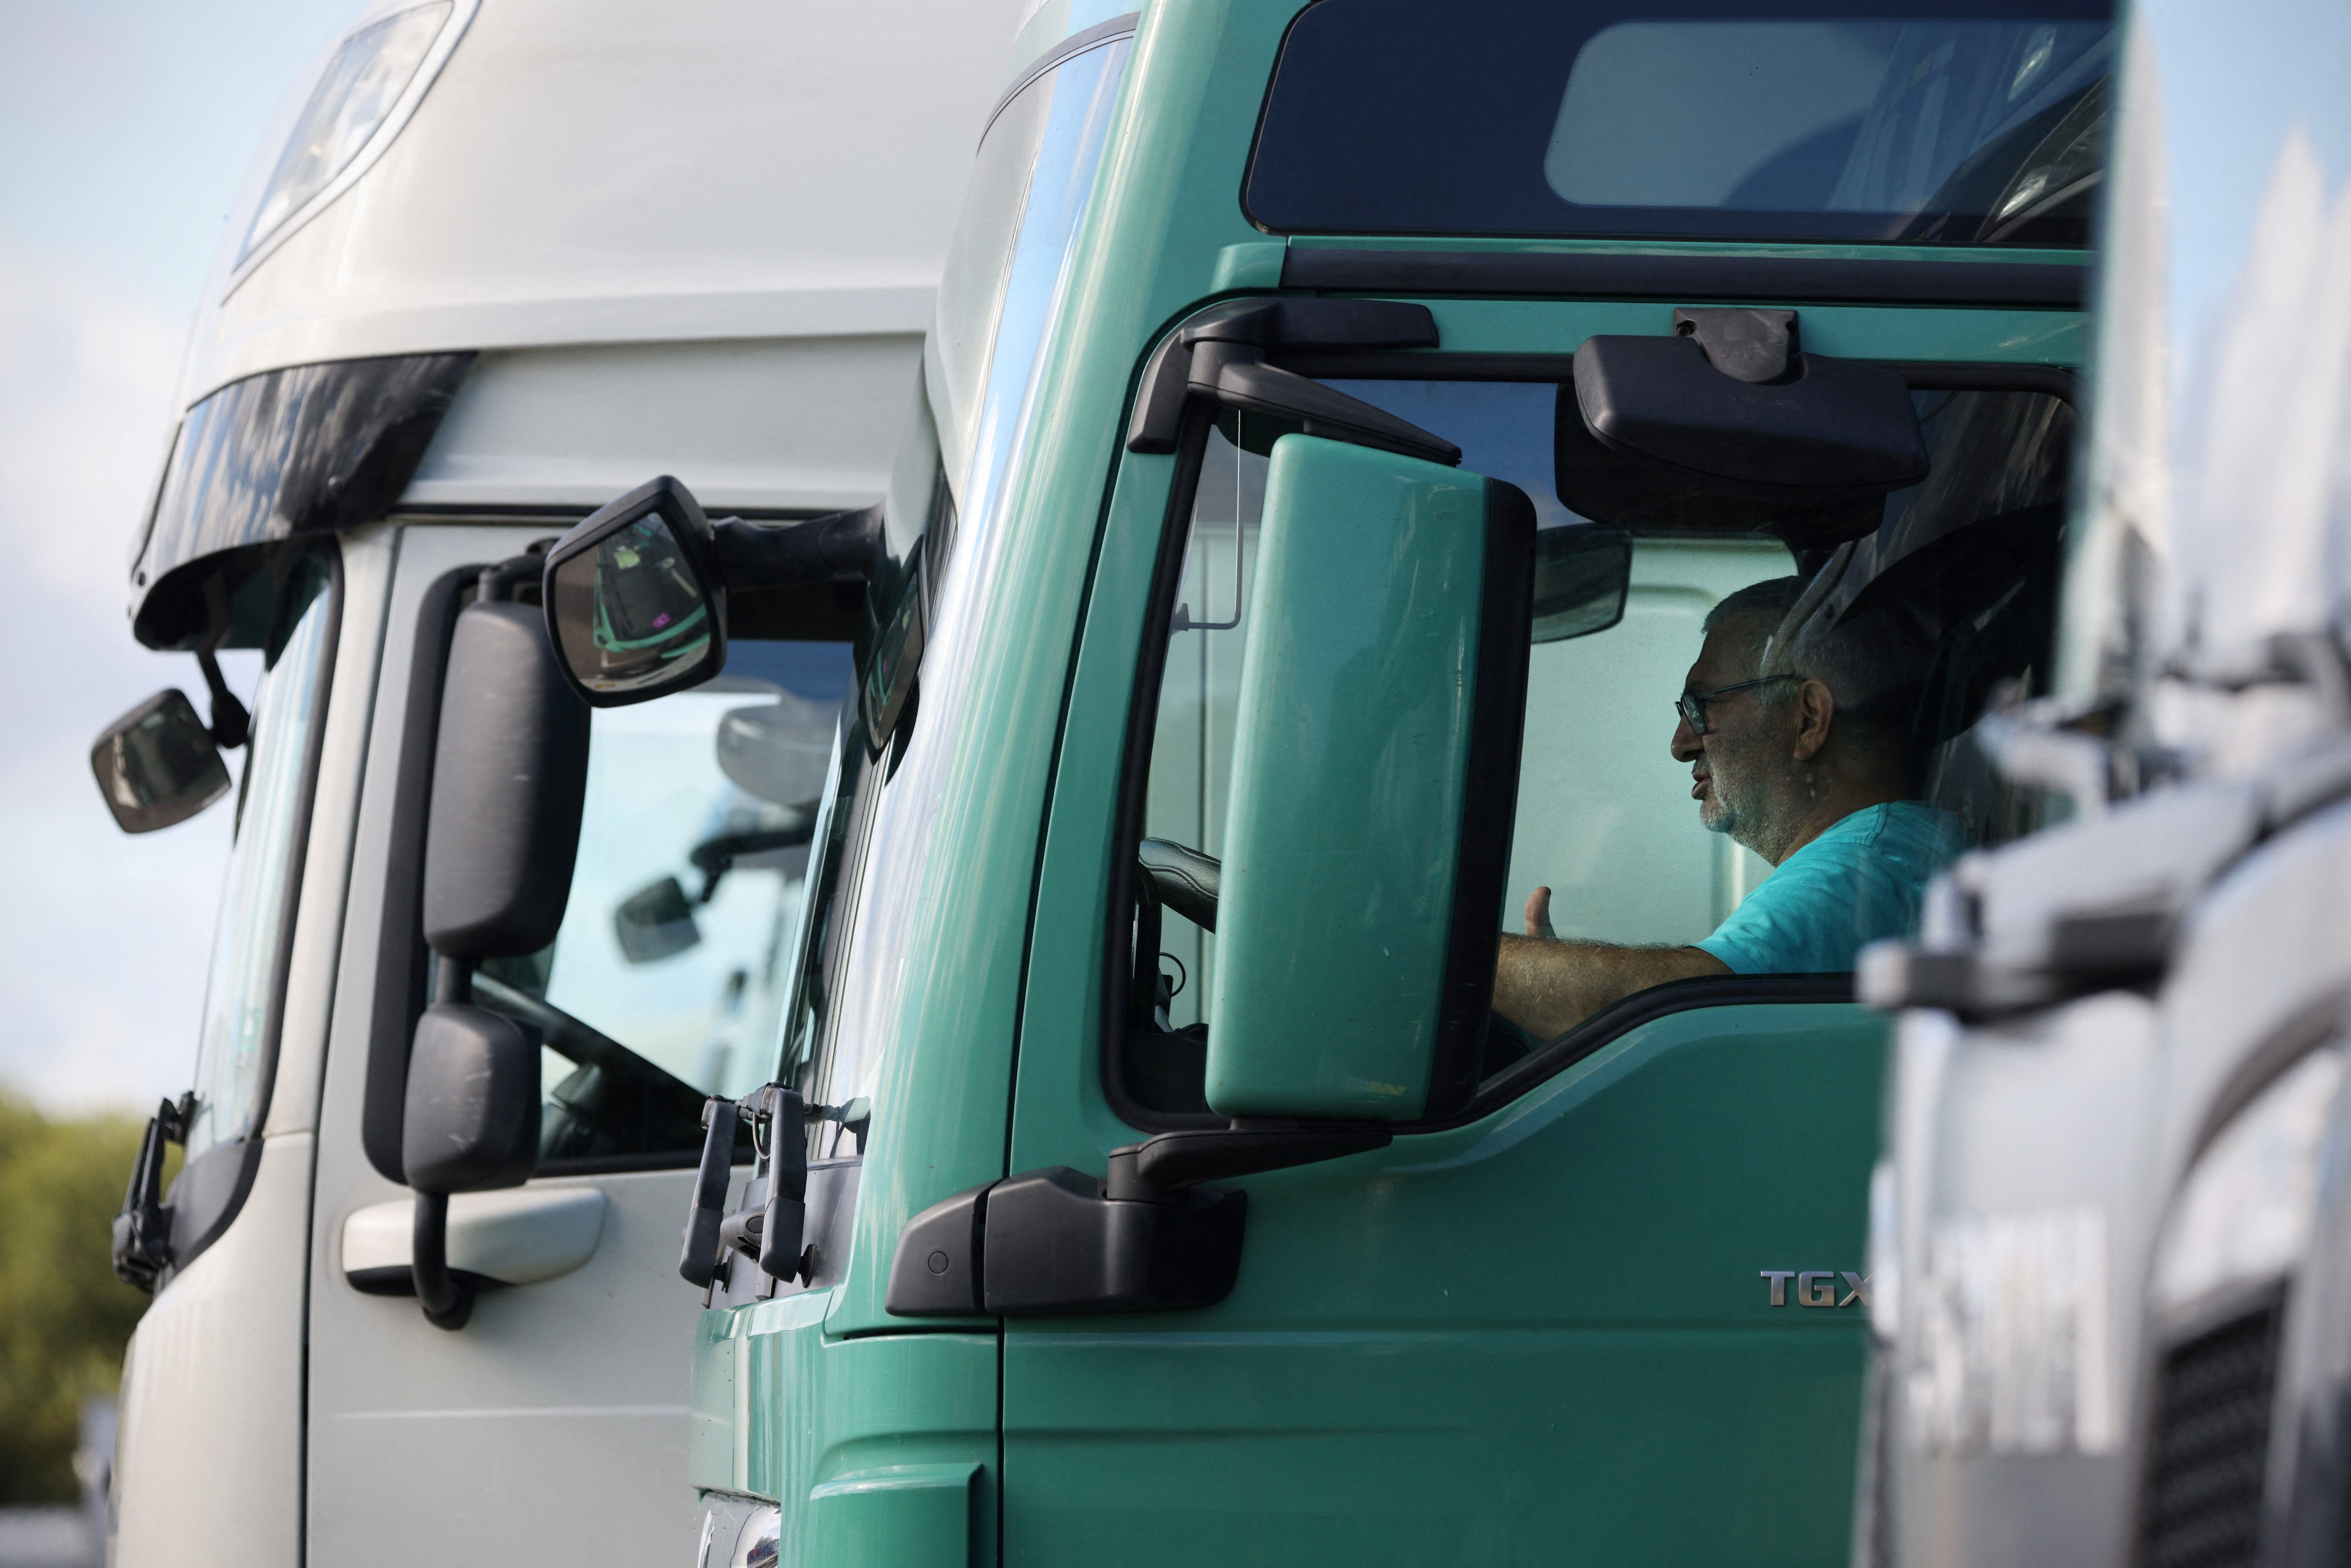 Brexit has been a factor in the UK’s lorry driver shortage